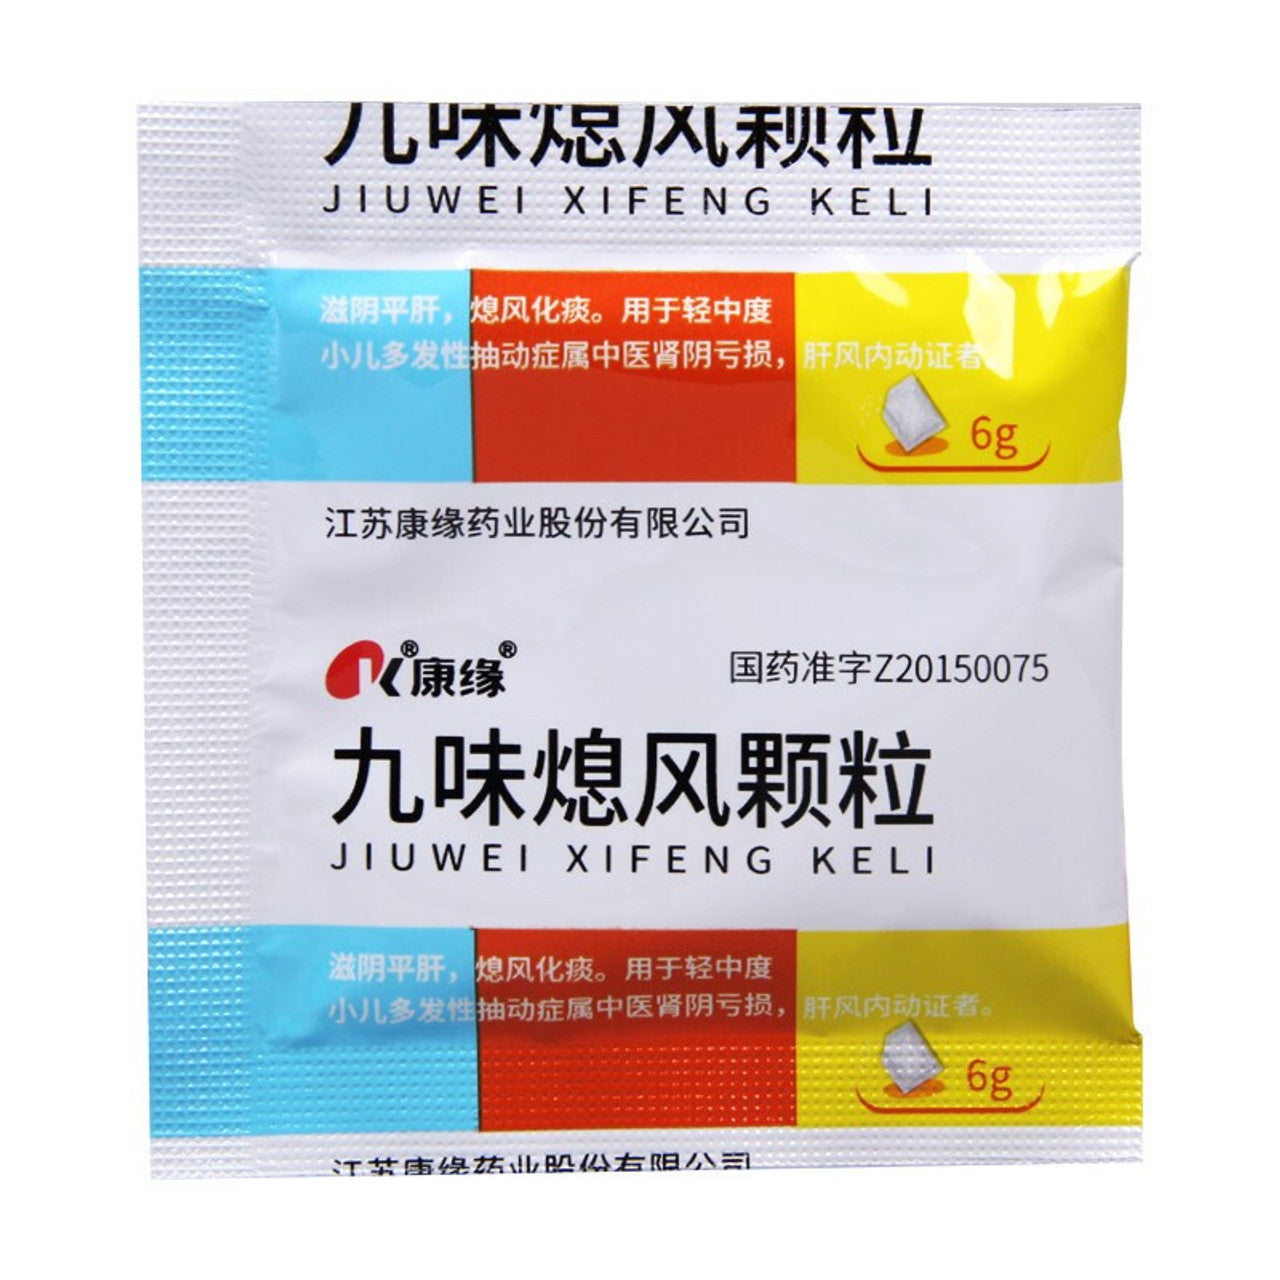 6 sachets*2 boxes/lot. Traditional Chinese Medicine. Jiuwei Xifeng Keli or Jiuwei Xifeng Granules For  involuntary twitching of the head and neck, facial features and limbs, abnormal sounds in the throat, red tongue, less coating, and narrow pulse.